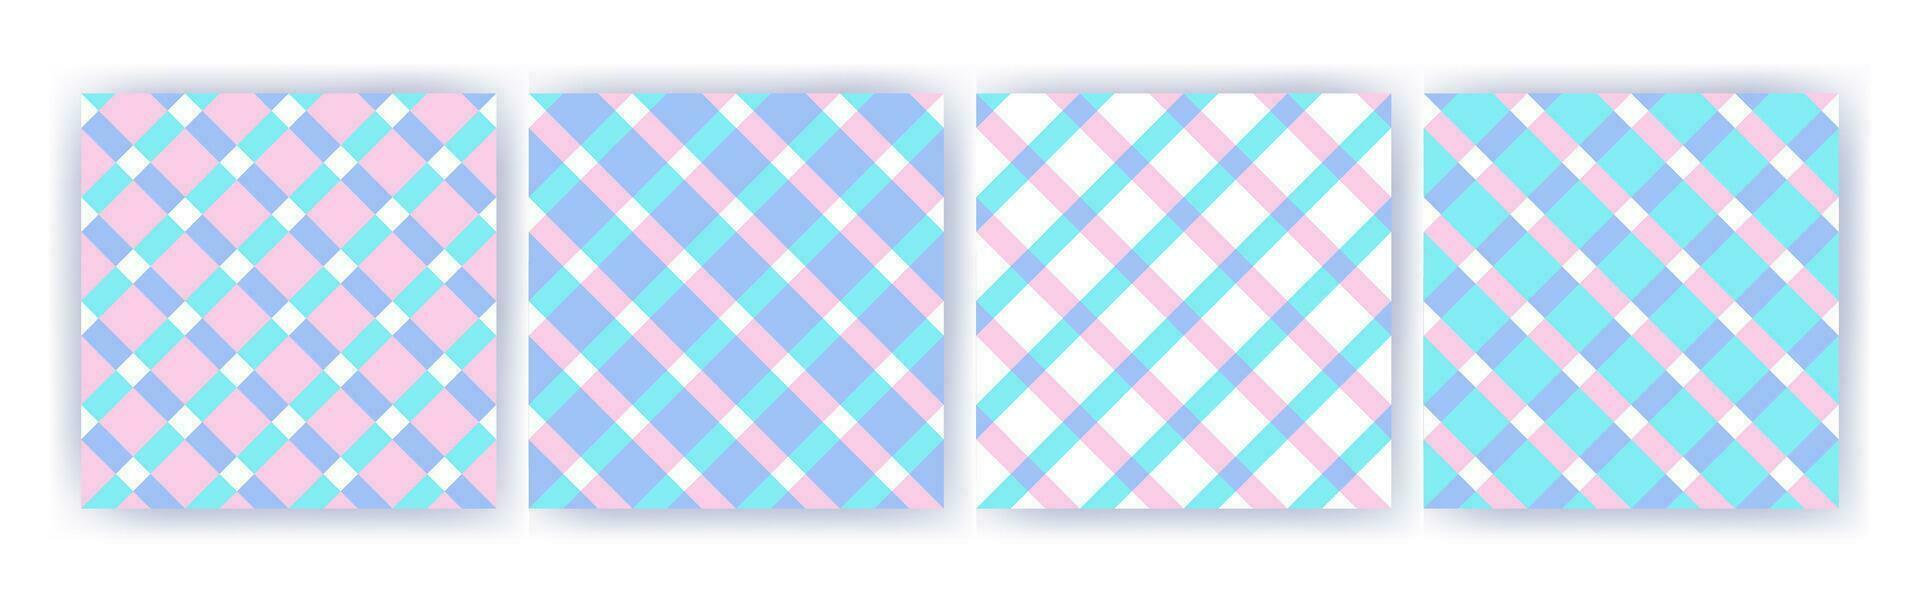 Vichy diagonal seamless pattern set in pastel colors for pink doll. Gingham design Birthday, Easter holiday textile decorative. Vector check plaid patterns fabric - picnic blanket, tablecloth, dress,.